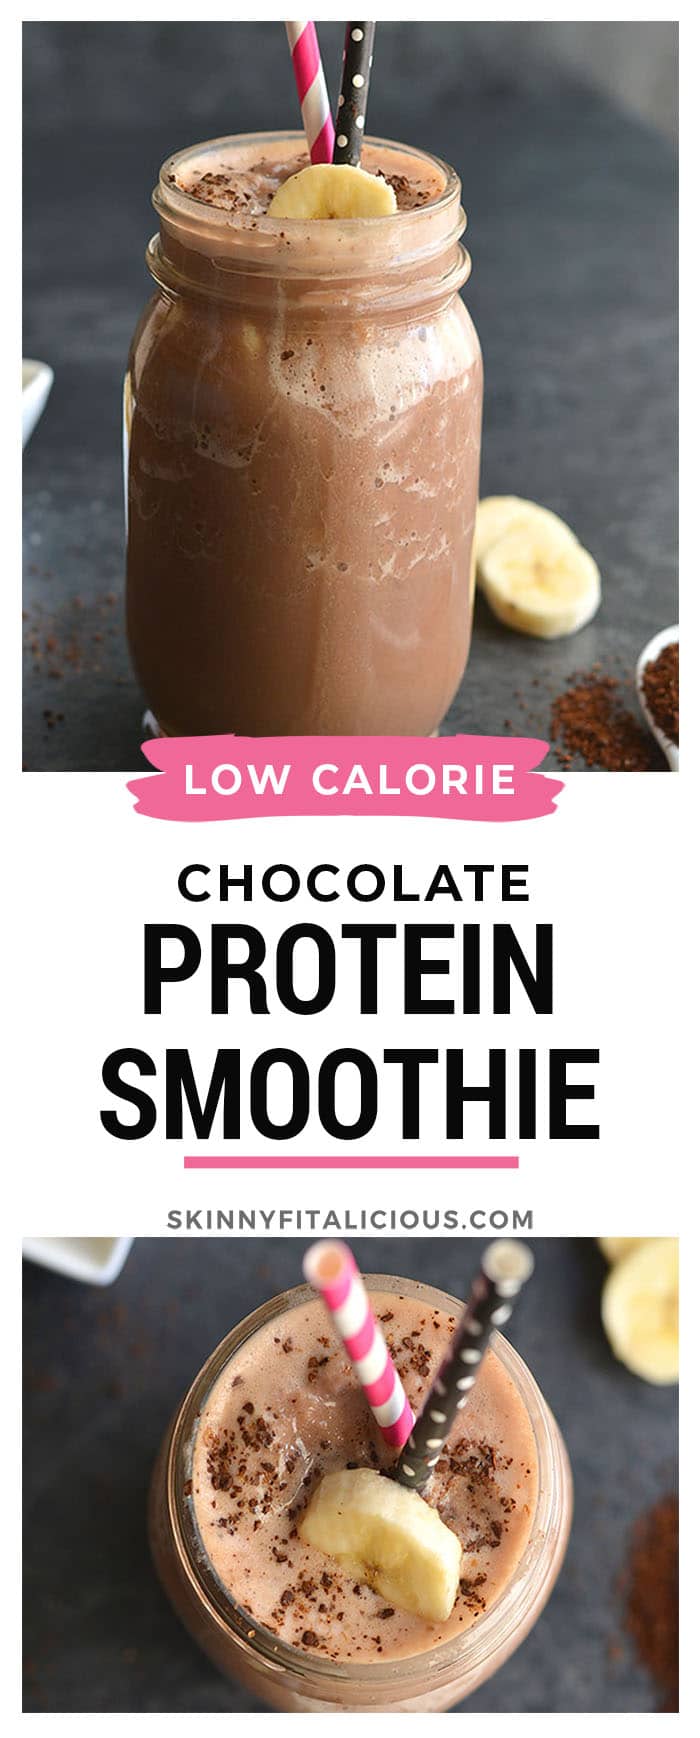 Chocolate Mocha Fudge Protein Smoothie! Get your caffeine fix with a plant based smoothie. Made with just 5 ingredients this smoothie is perfect for post workout recovery or a quick energy boost.